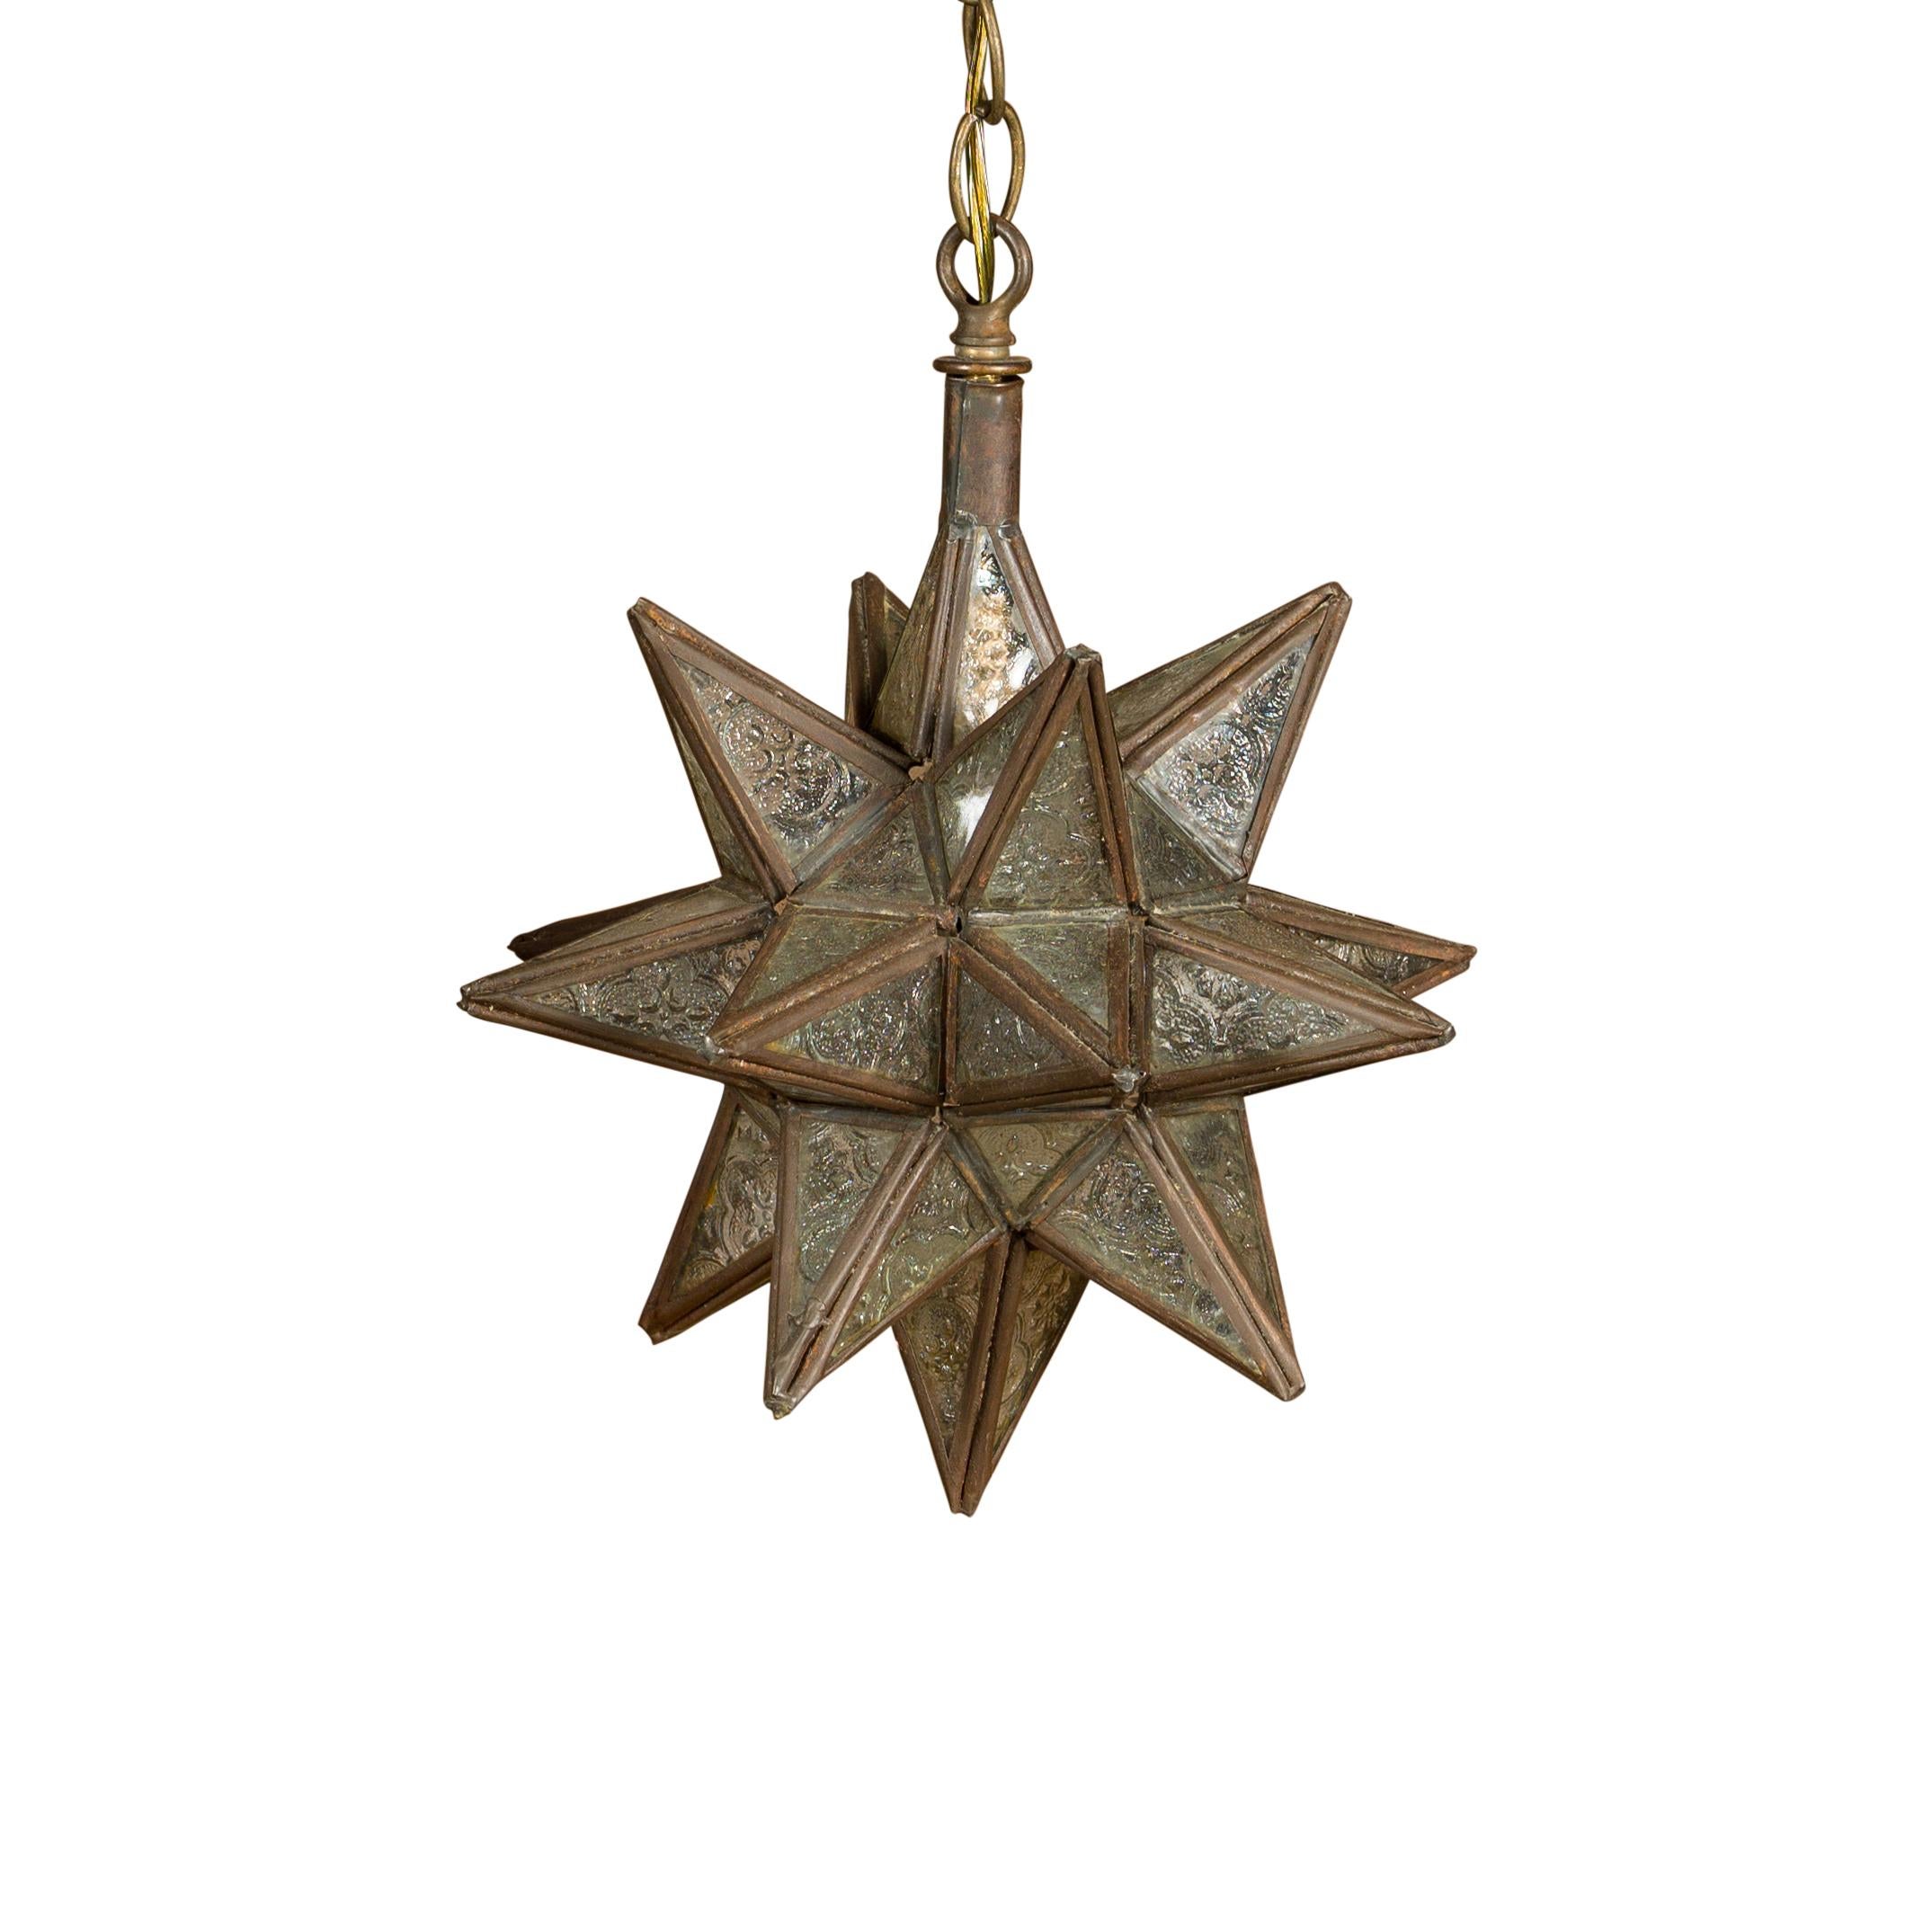 Midcentury French Star Light Fixture with Textured Glass and Single Socket For Sale 6